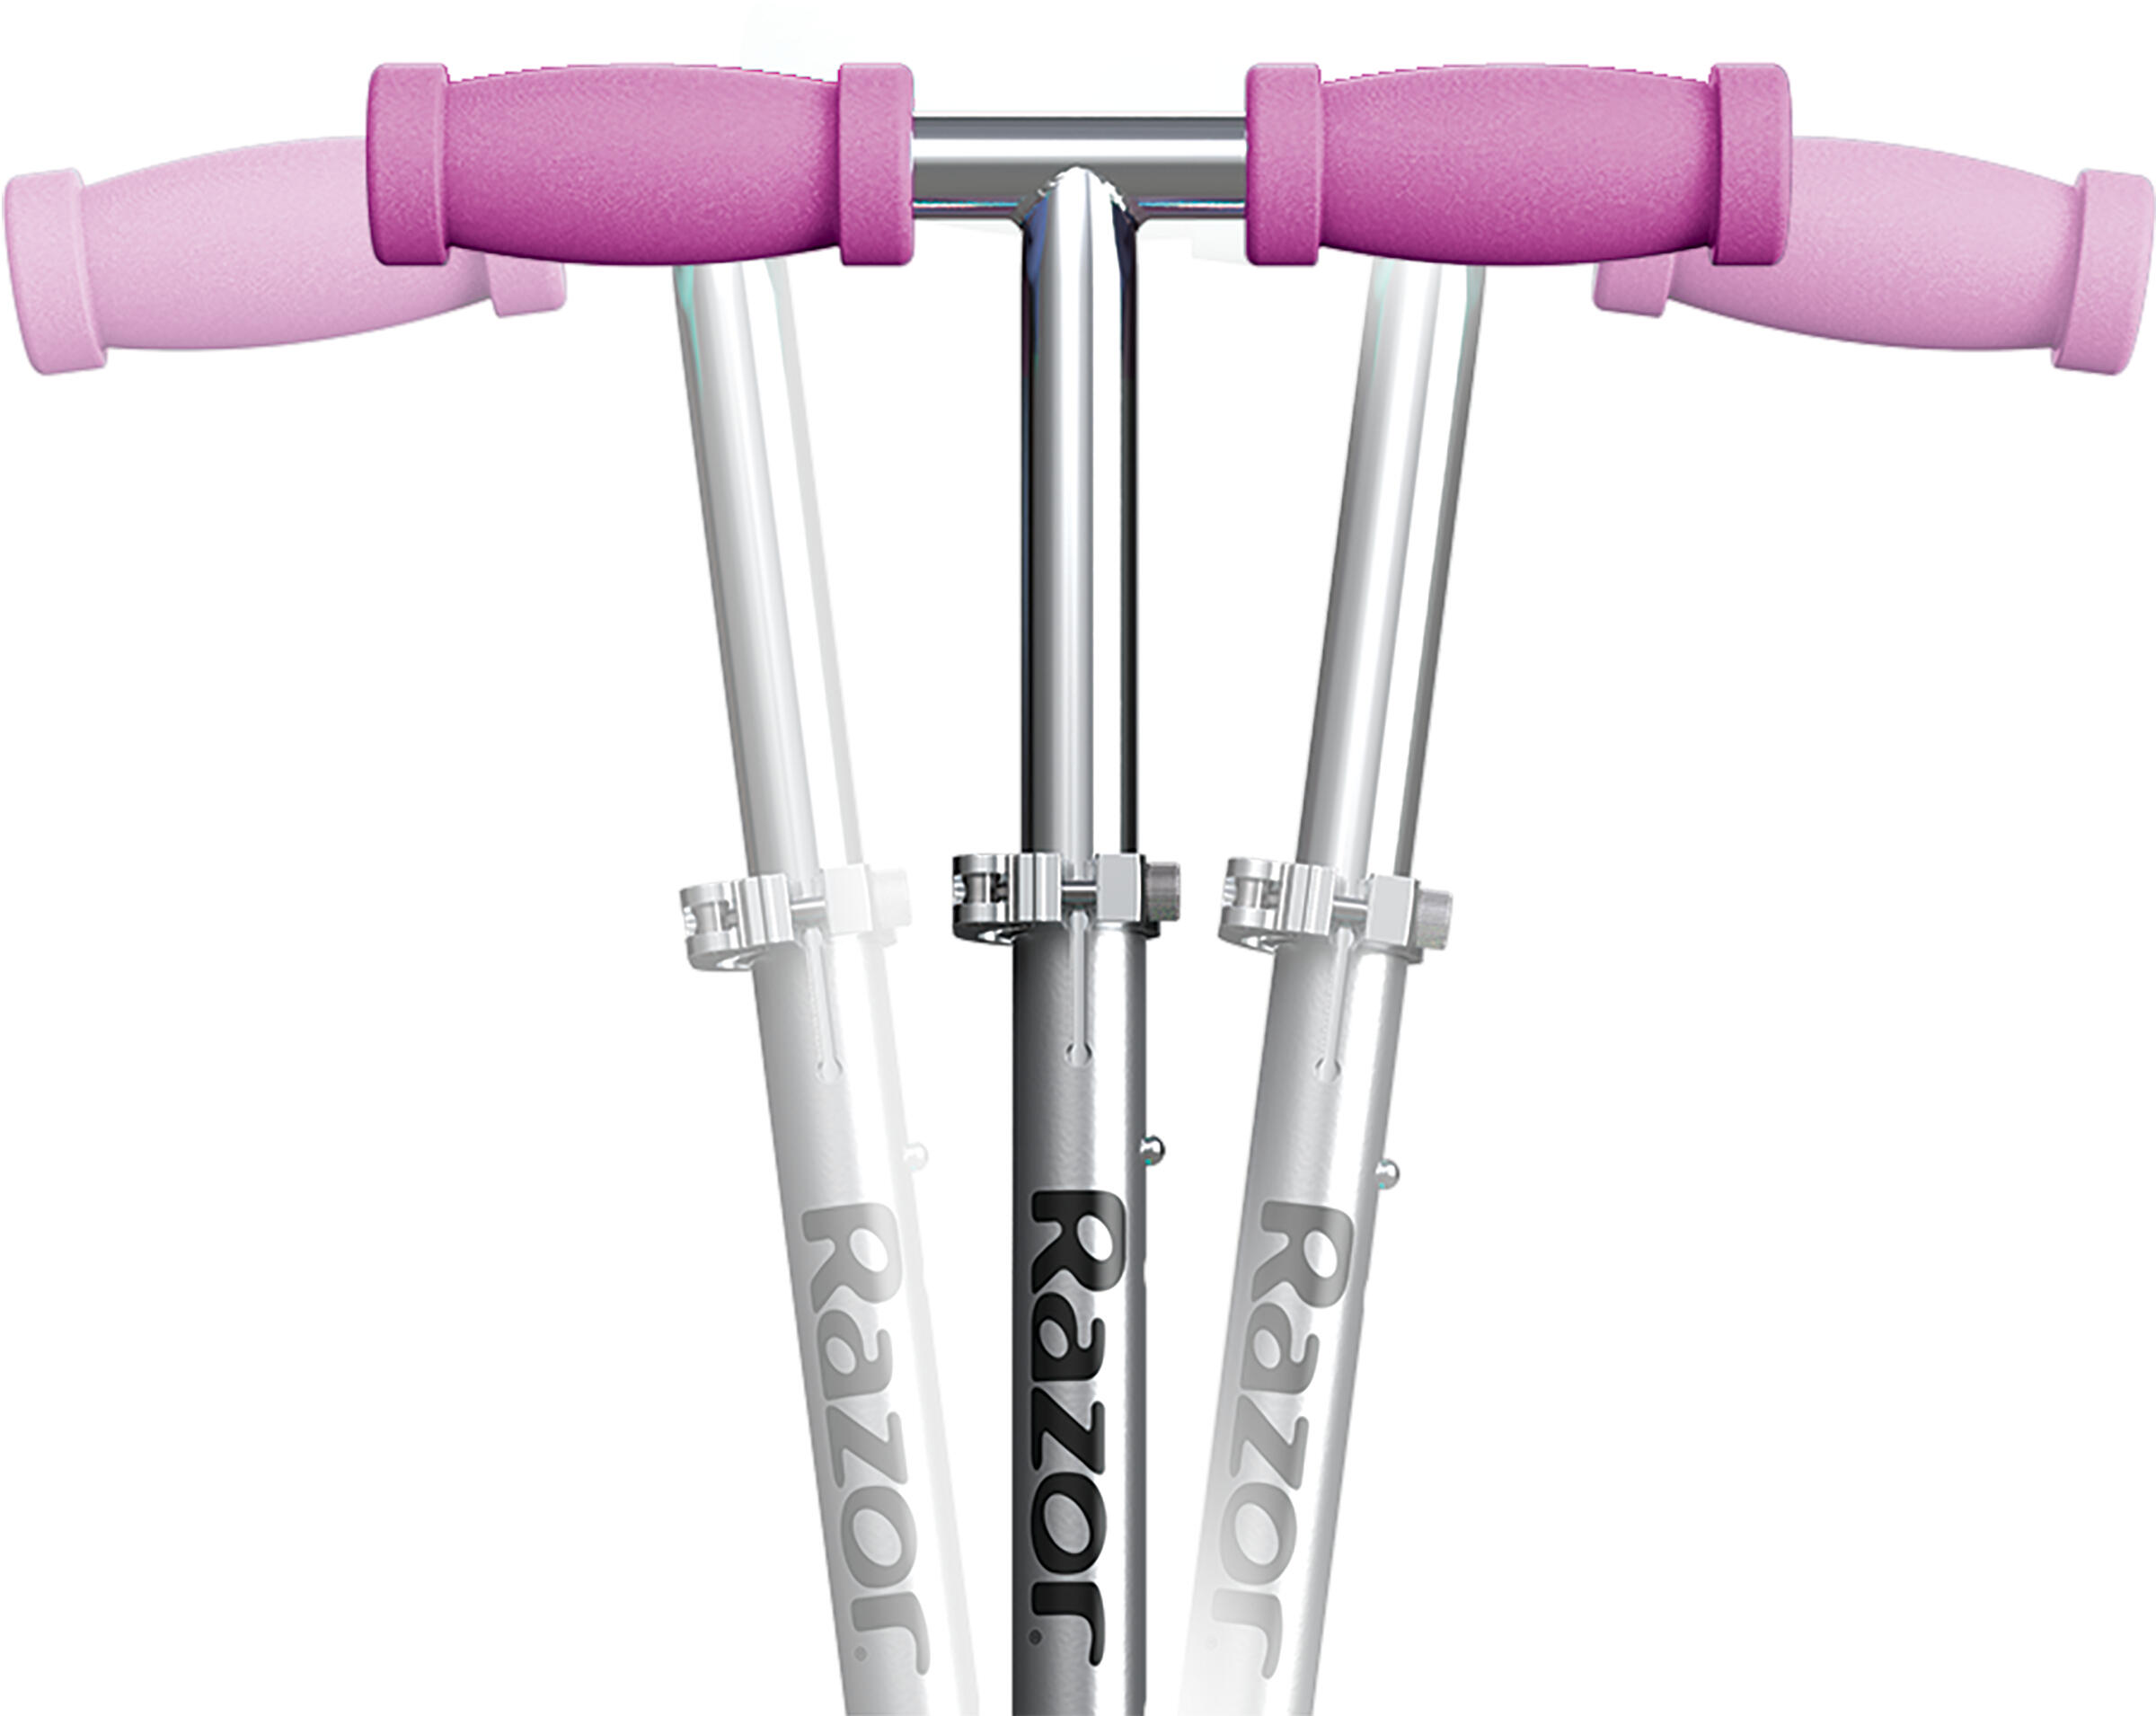 Rollie 2-in-1 Scooter - Pink 5/7